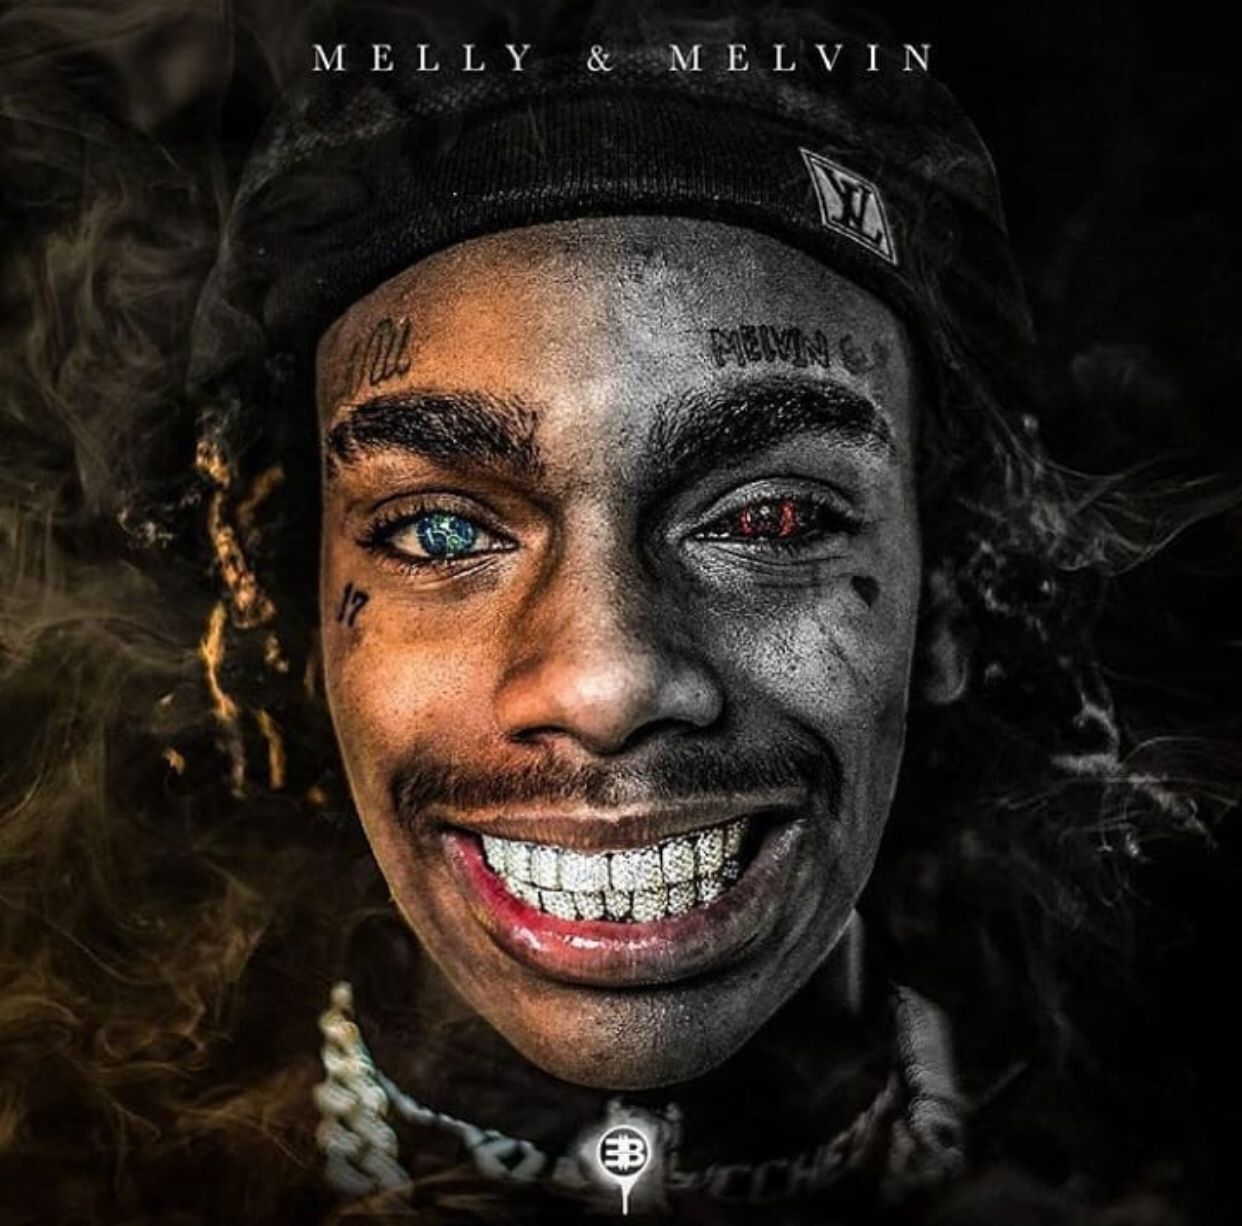 Ynw melly wallpaper for mobile phone tablet desktop puter and other devices hd and k wallpapers rap wallpaper lowkey rapper rapper style